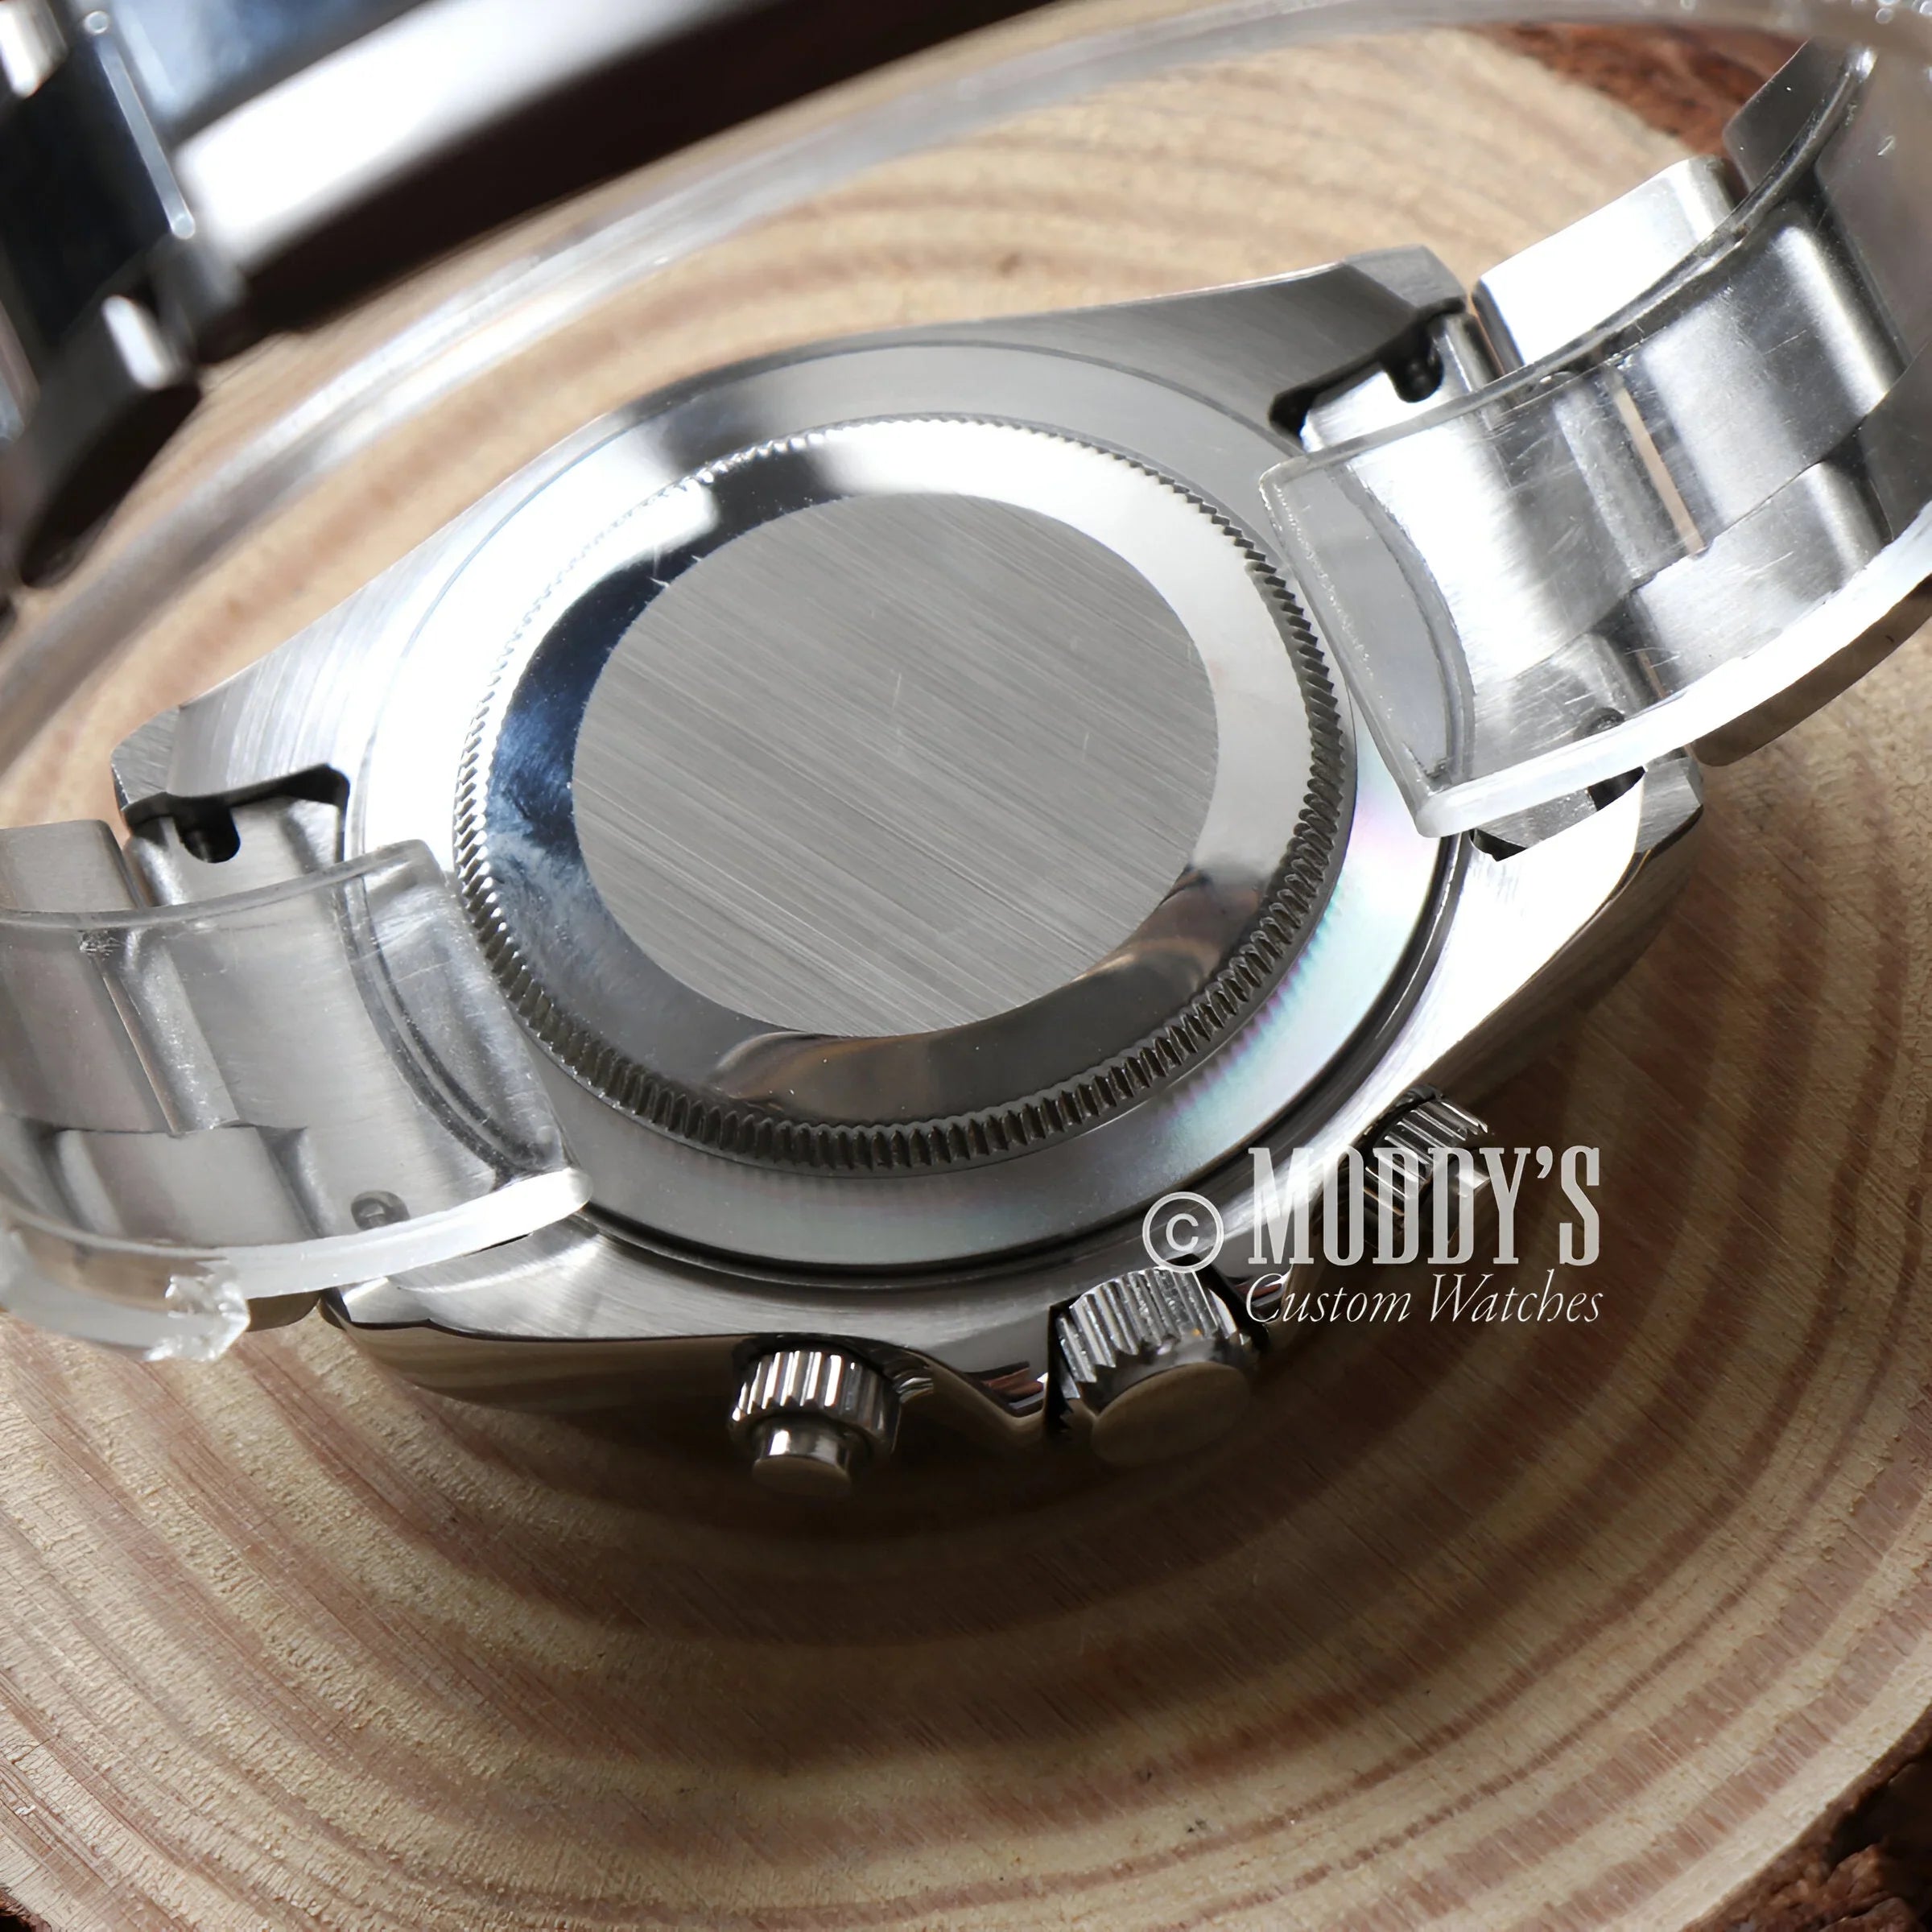 Seitona Platinum Watch On a Wooden Table, Showing Vk63 Hybrid Design